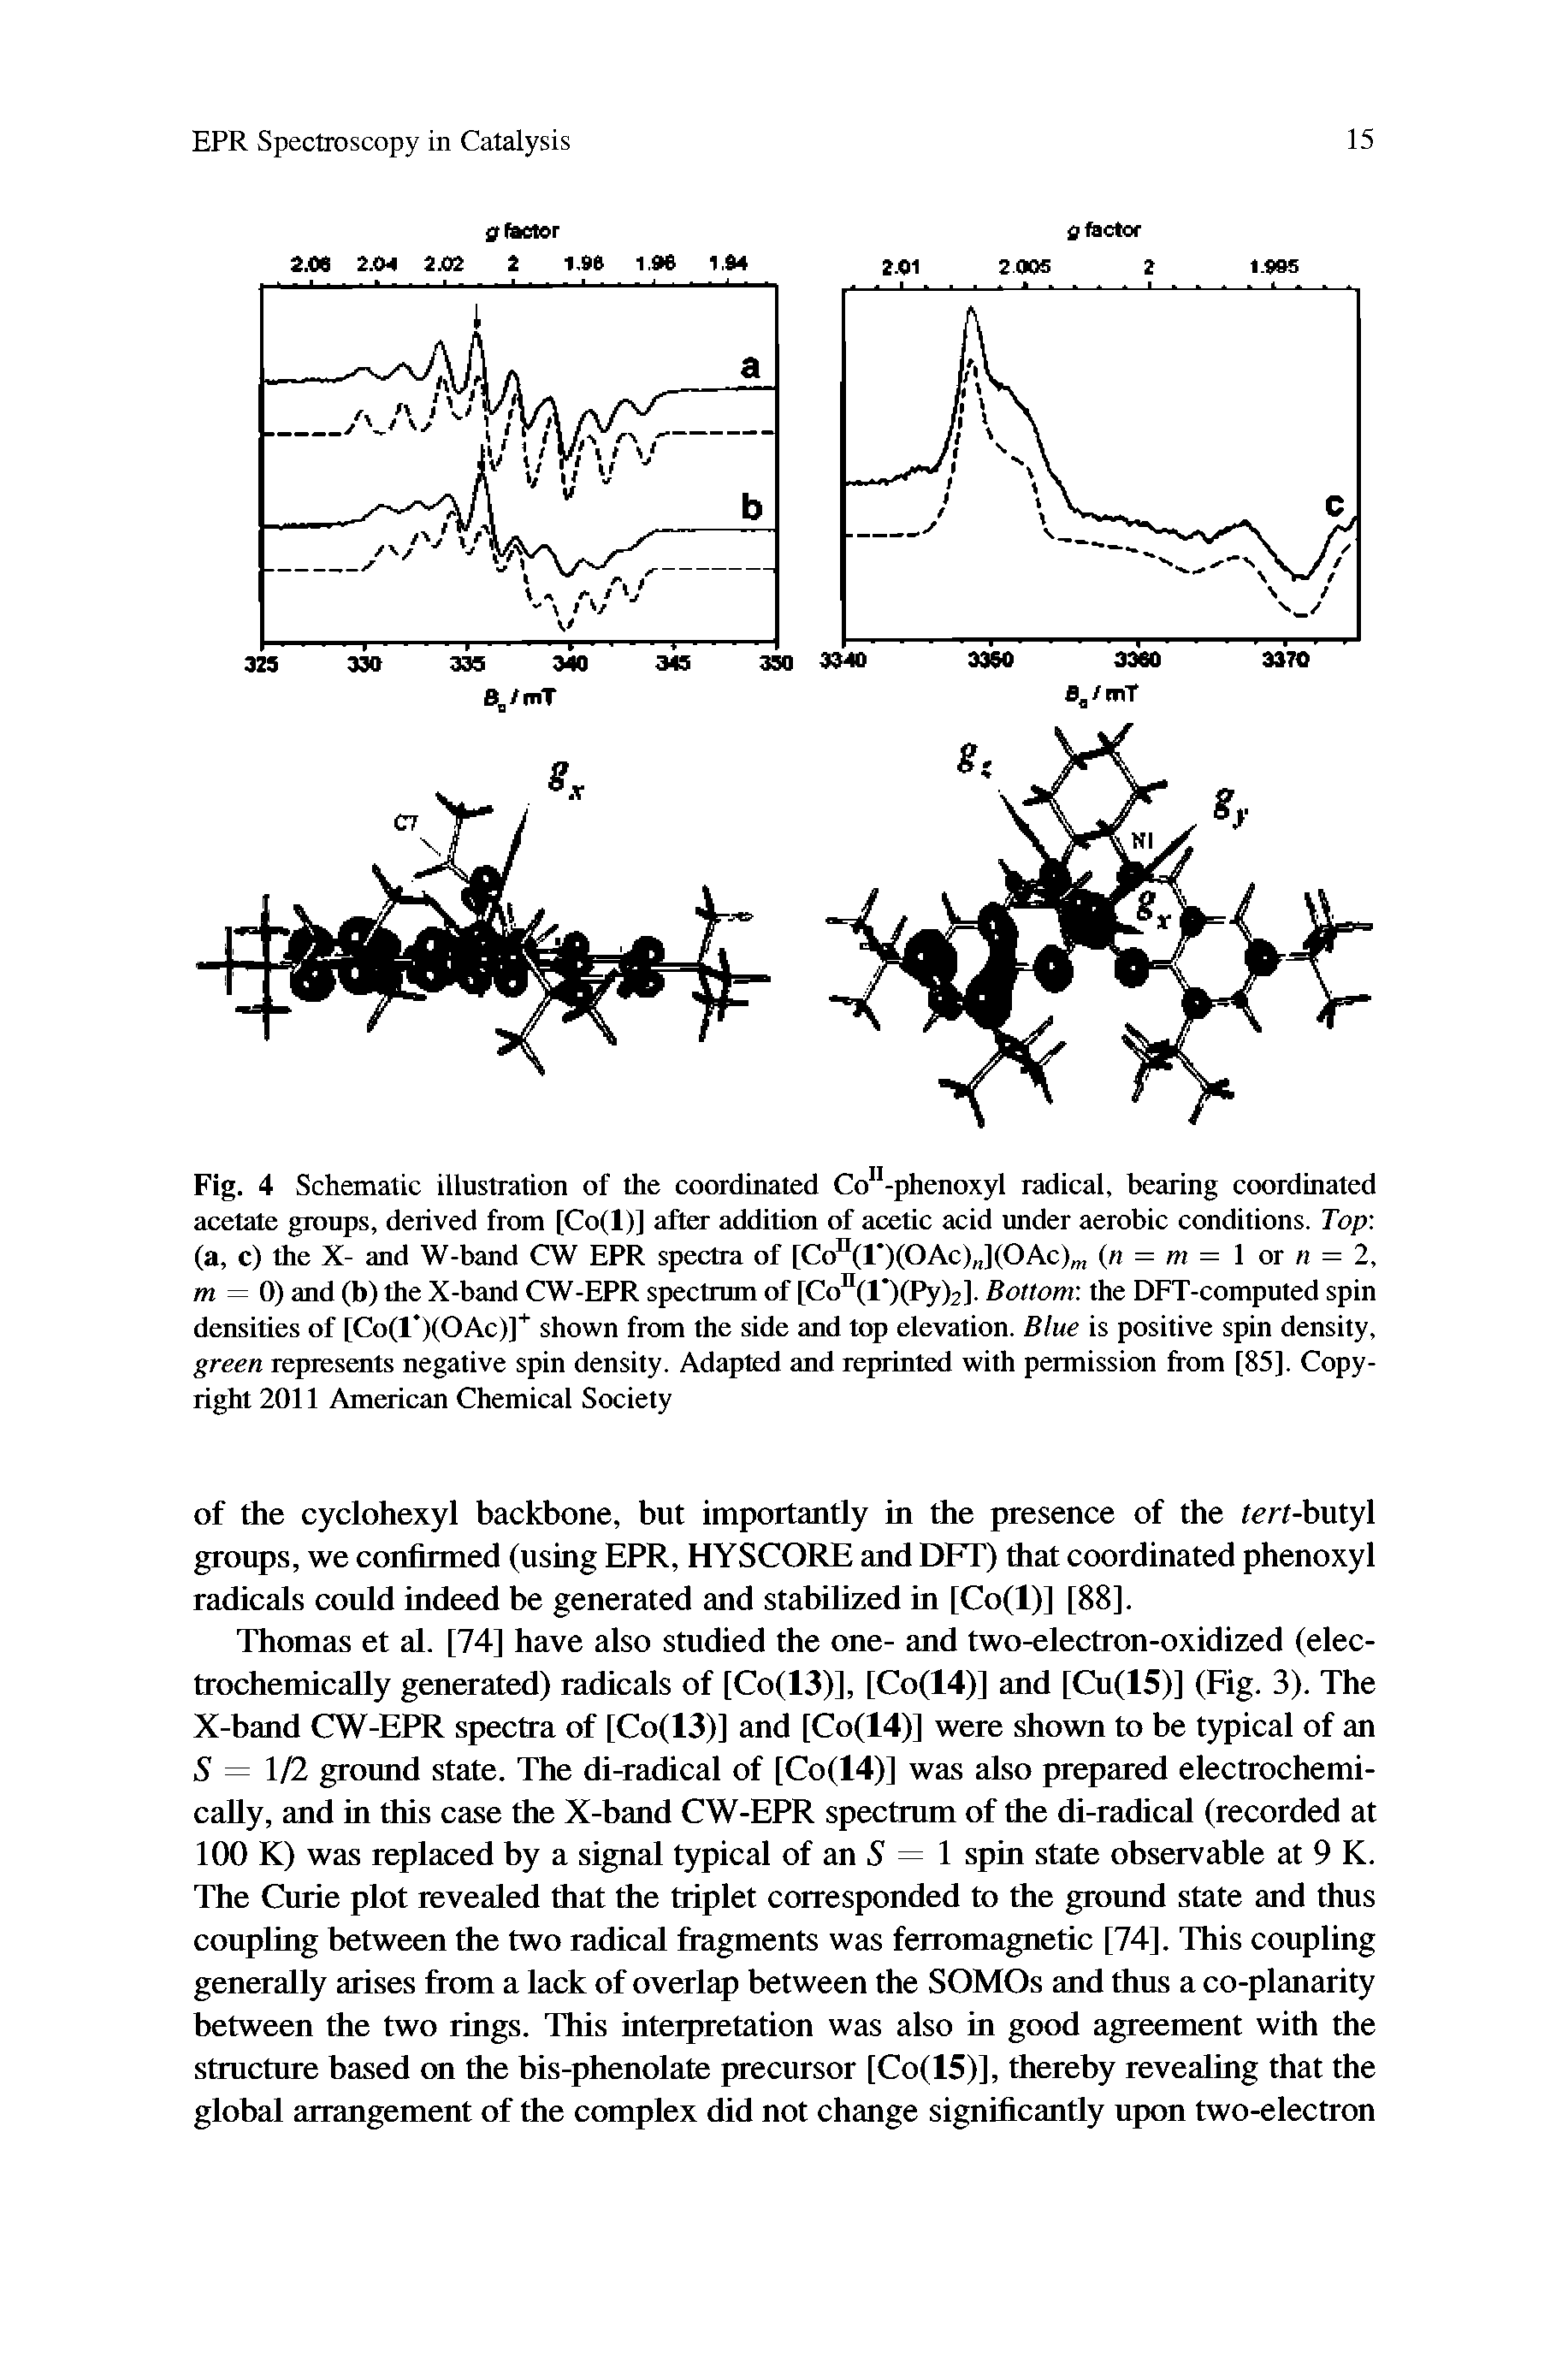 Fig. 4 Schematic illustration of the coordinated Co -phenoxyl radical, bearing coordinated acetate groups, derived from [Co(l)] after addition of acetic acid under aerobic conditions. Top (a, c) the X- and W-band CW EPR spectra of [Co°(r)(OAc) ](OAc) (n = m = 1 or n = 2, m = G) and (b) the X-band CW-EPR spectrum of [Co (l )(Py)2]. Bottom the DFT-computed spin densities of [Co(l )(OAc)] shown from the side and top elevation. Blue is positive spin density, green represents negative spin density. Adapted and reprinted with permission from [85]. Copyright 2011 American Chemical Society...